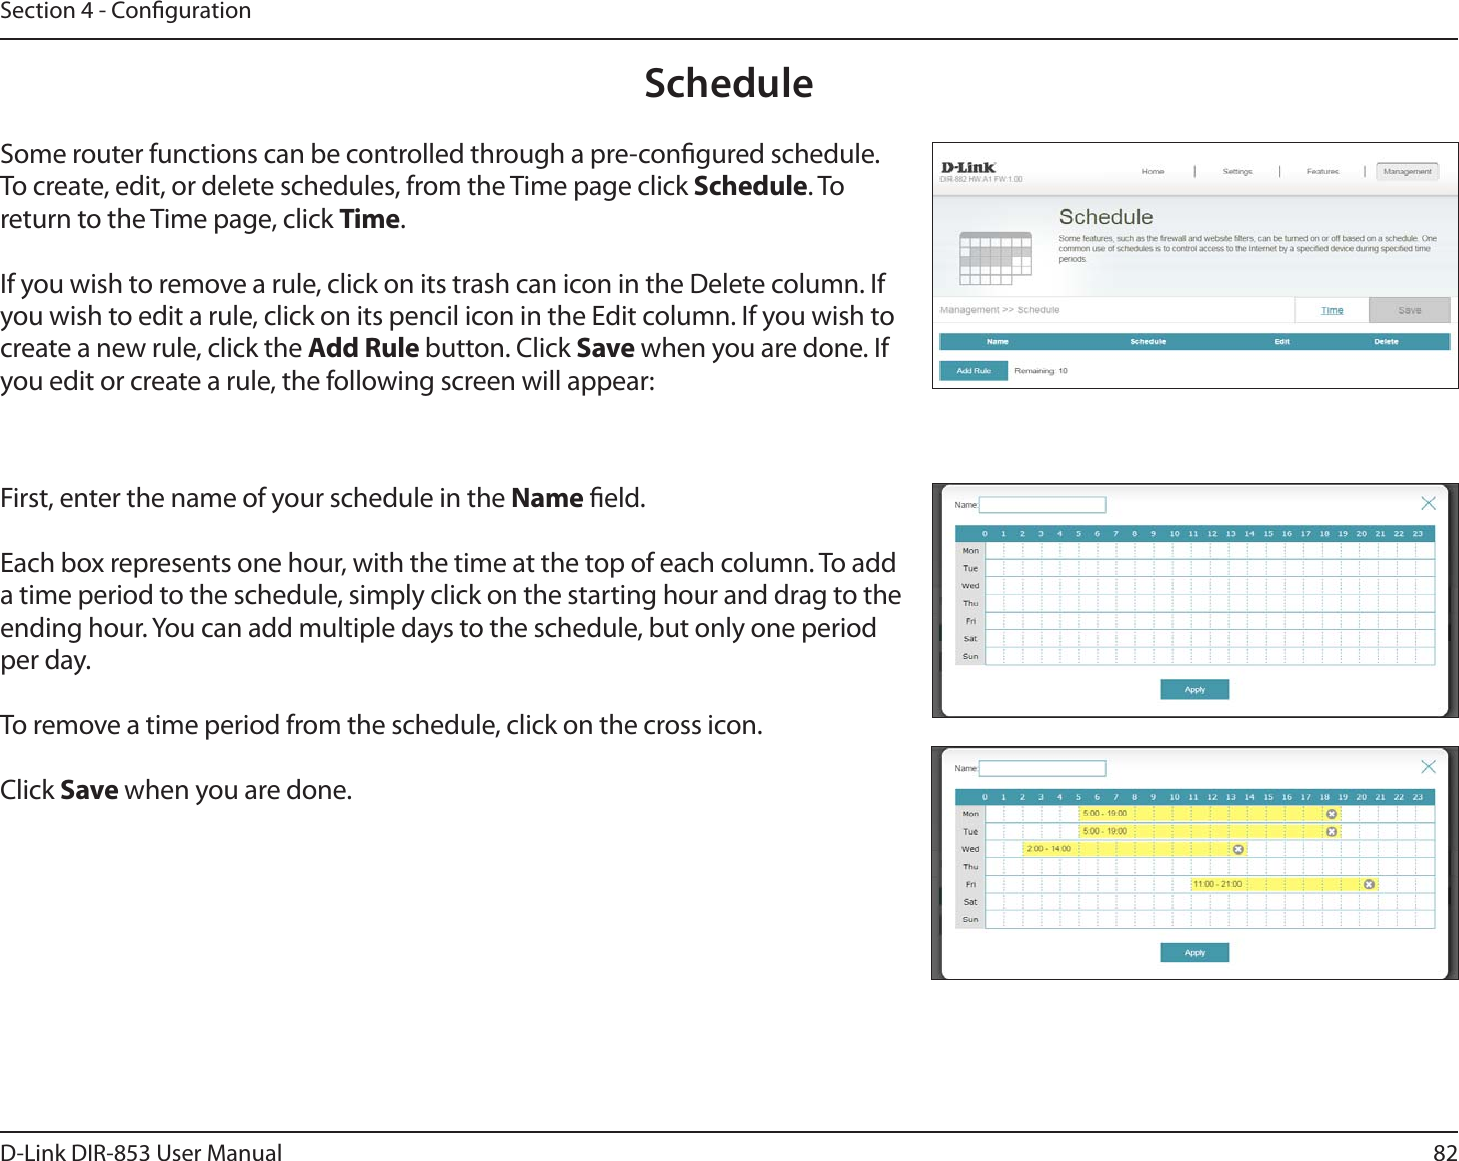 82D-Link DIR-853 User ManualSection 4 - CongurationScheduleSome router functions can be controlled through a pre-congured schedule. To create, edit, or delete schedules, from the Time page click Schedule. To return to the Time page, click Time. If you wish to remove a rule, click on its trash can icon in the Delete column. If you wish to edit a rule, click on its pencil icon in the Edit column. If you wish to create a new rule, click the Add Rule button. Click Save when you are done. If you edit or create a rule, the following screen will appear:First, enter the name of your schedule in the Name eld.Each box represents one hour, with the time at the top of each column. To add a time period to the schedule, simply click on the starting hour and drag to the ending hour. You can add multiple days to the schedule, but only one period per day.To remove a time period from the schedule, click on the cross icon.Click Save when you are done.